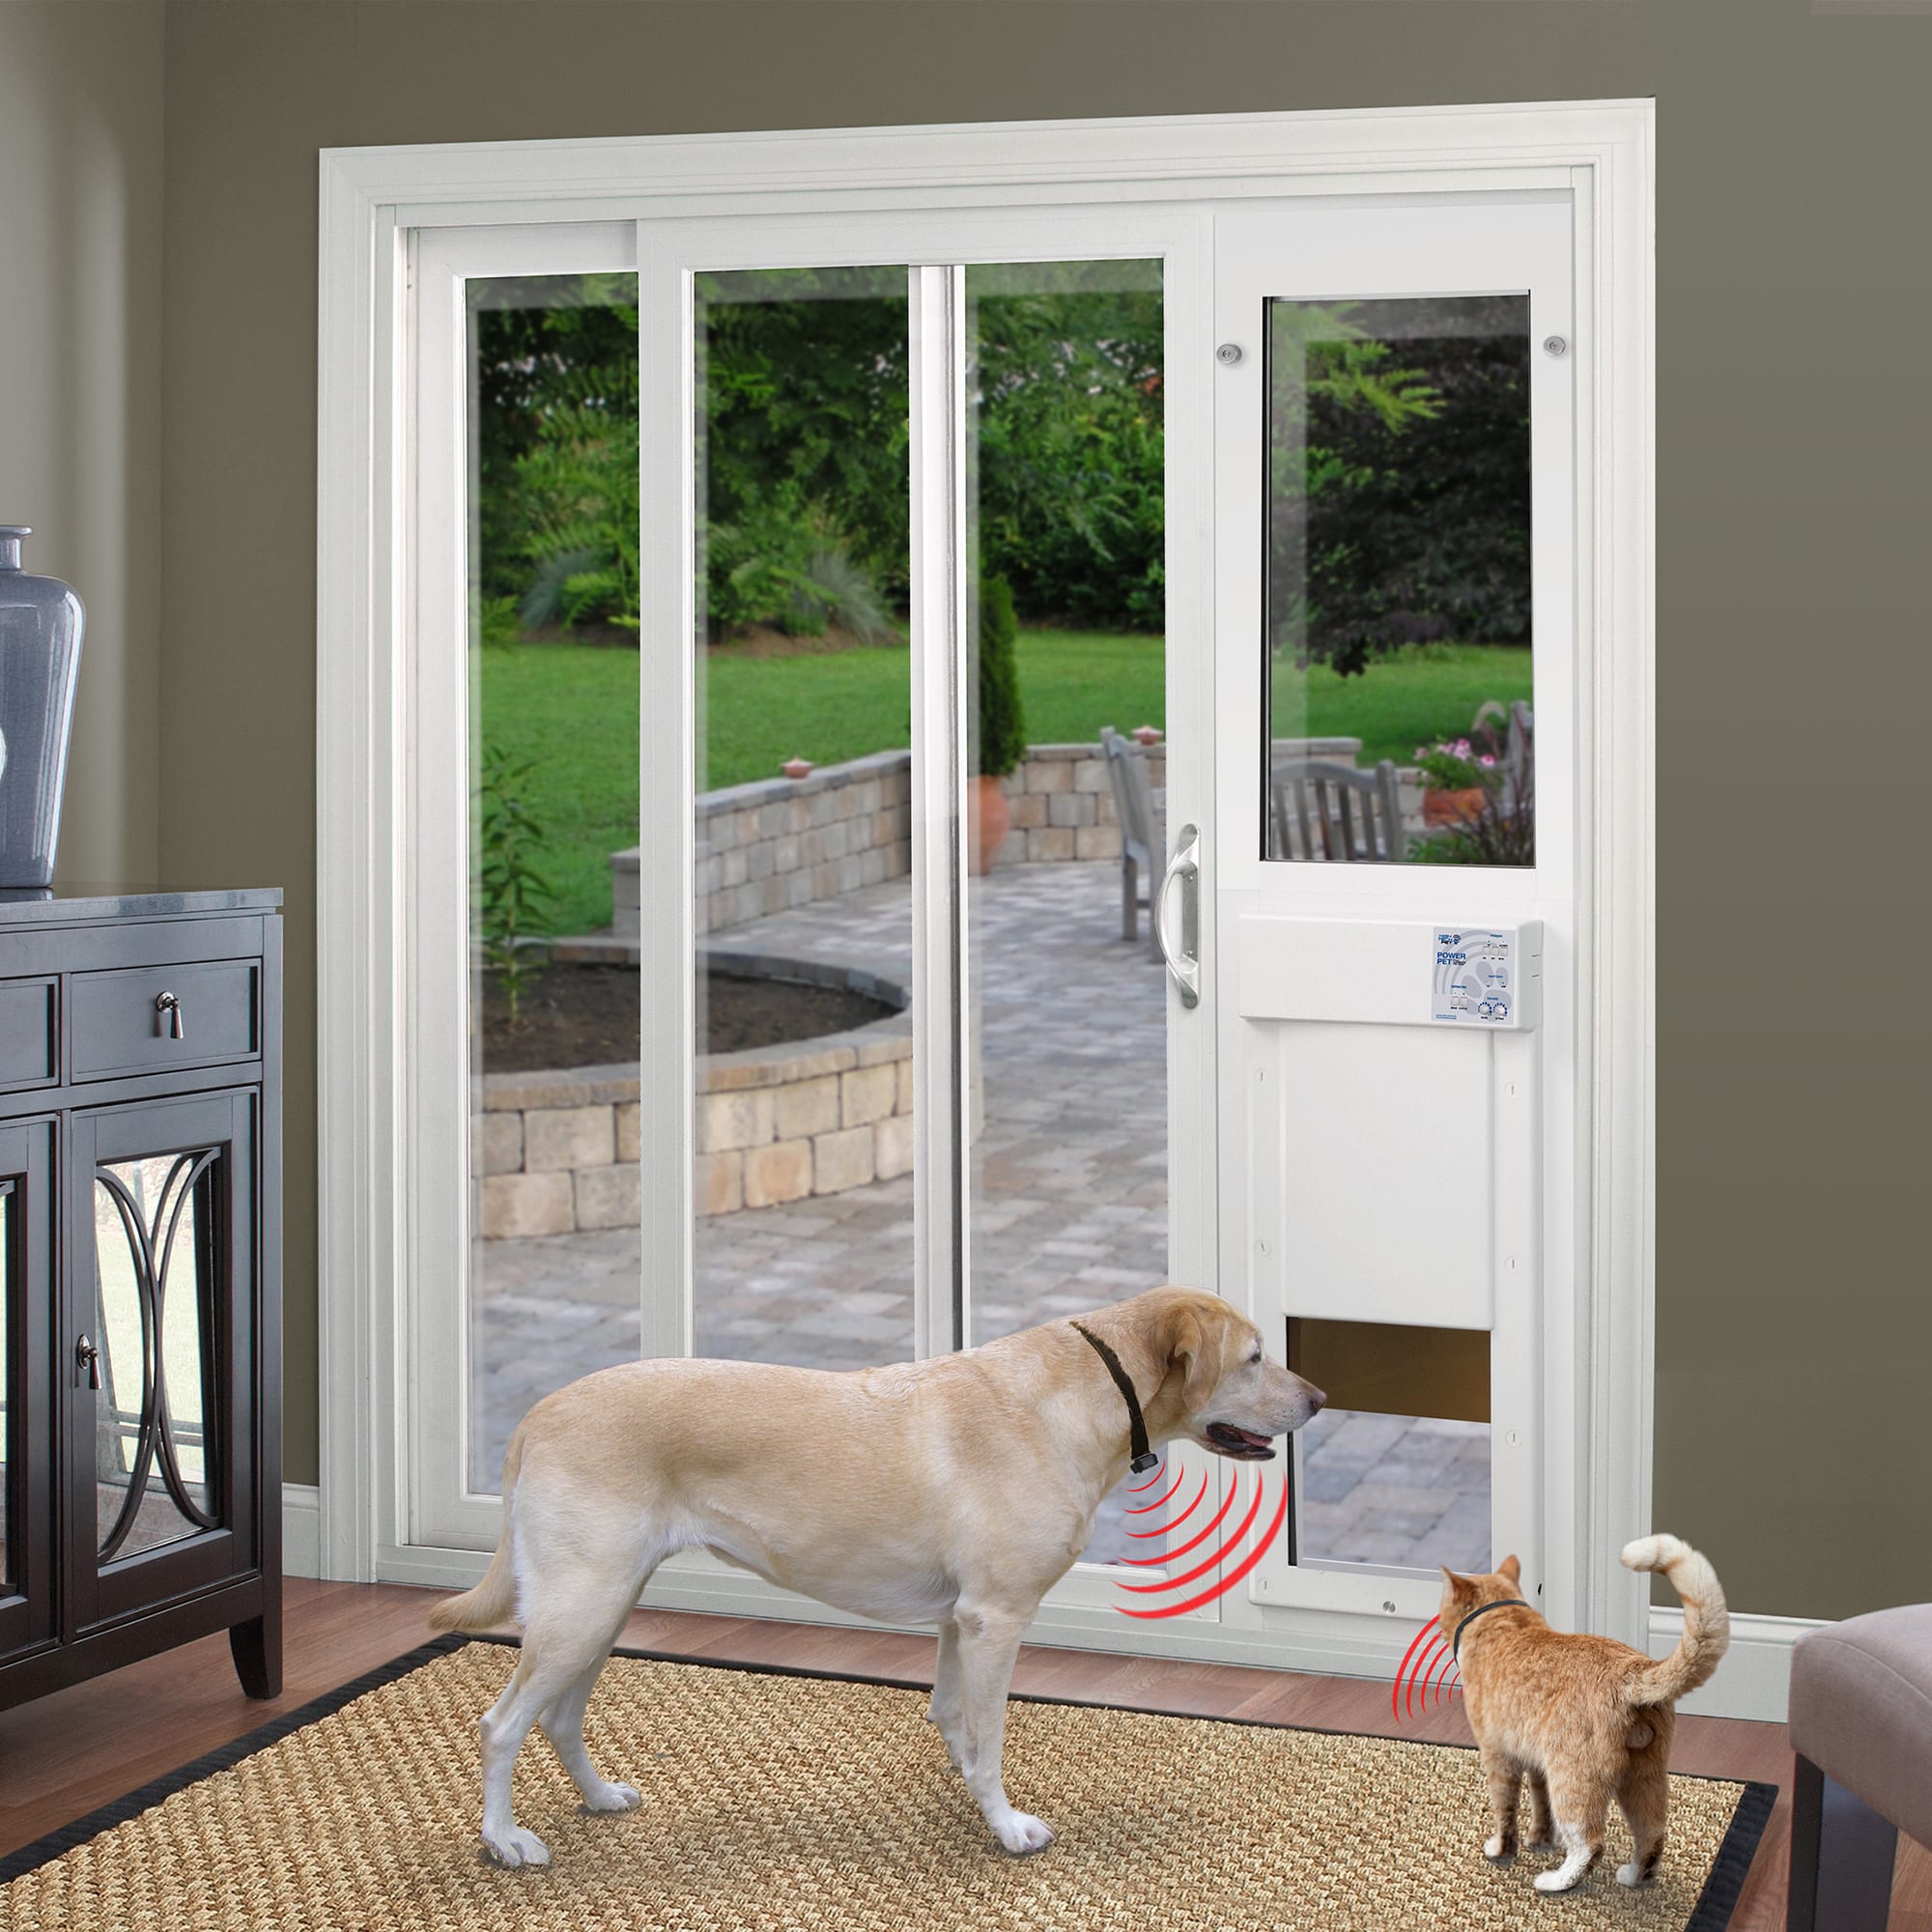 Extra Tall Fully Automatic Patio Door, Automatic Dog Door Sliding Glass